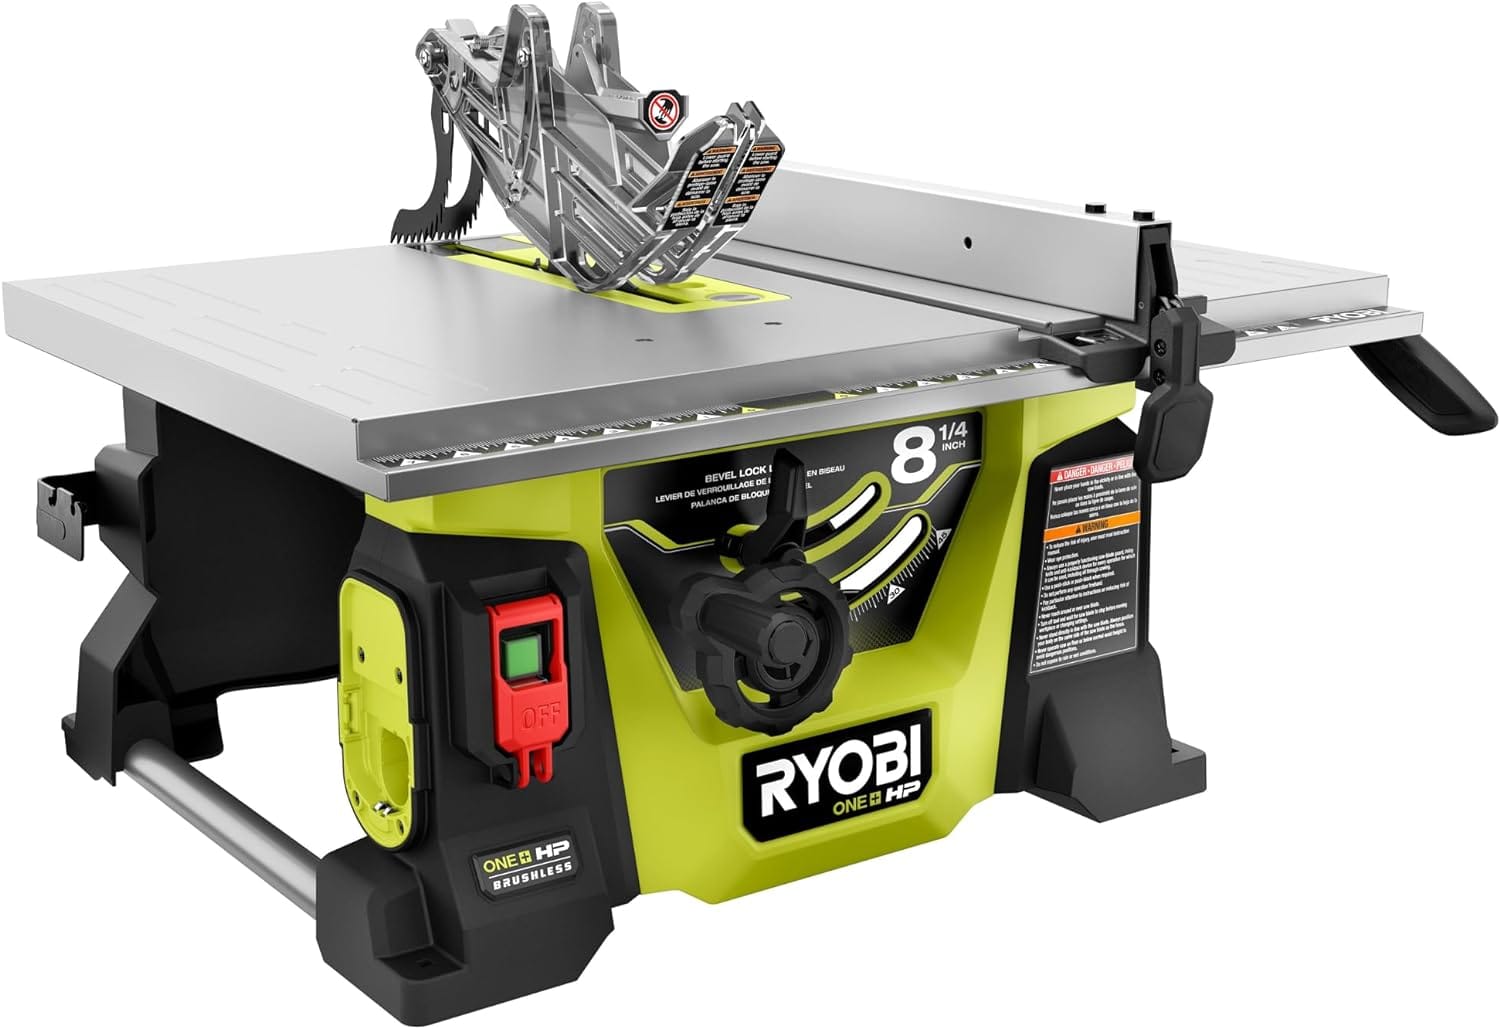 The Features and Benefits Of A Ryobi Table Saw